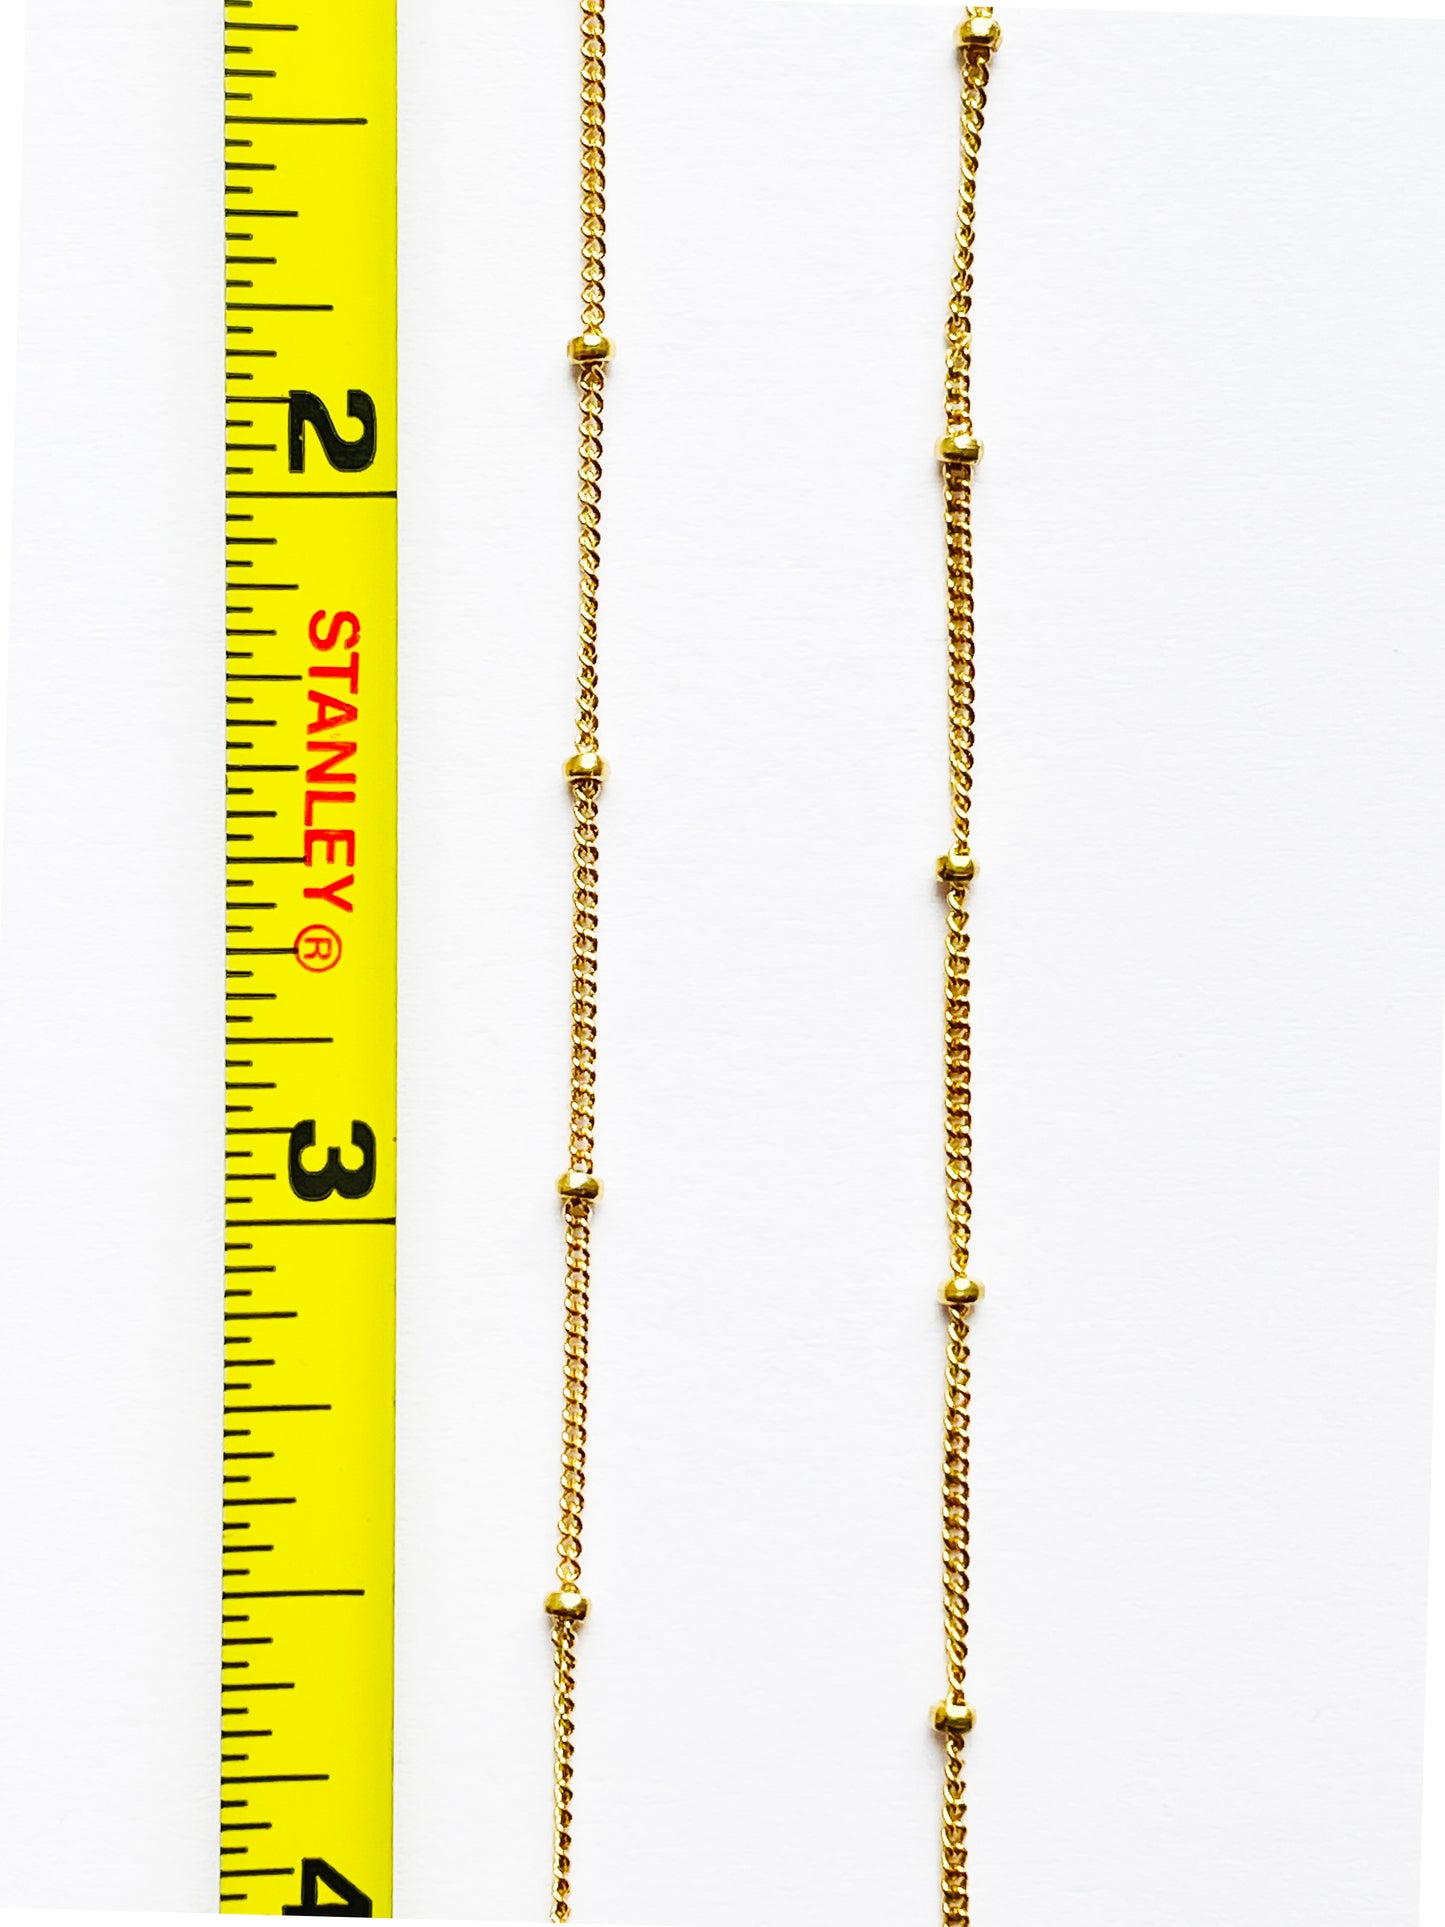 Two 14" sections of Gold-Filled Satellite Chain